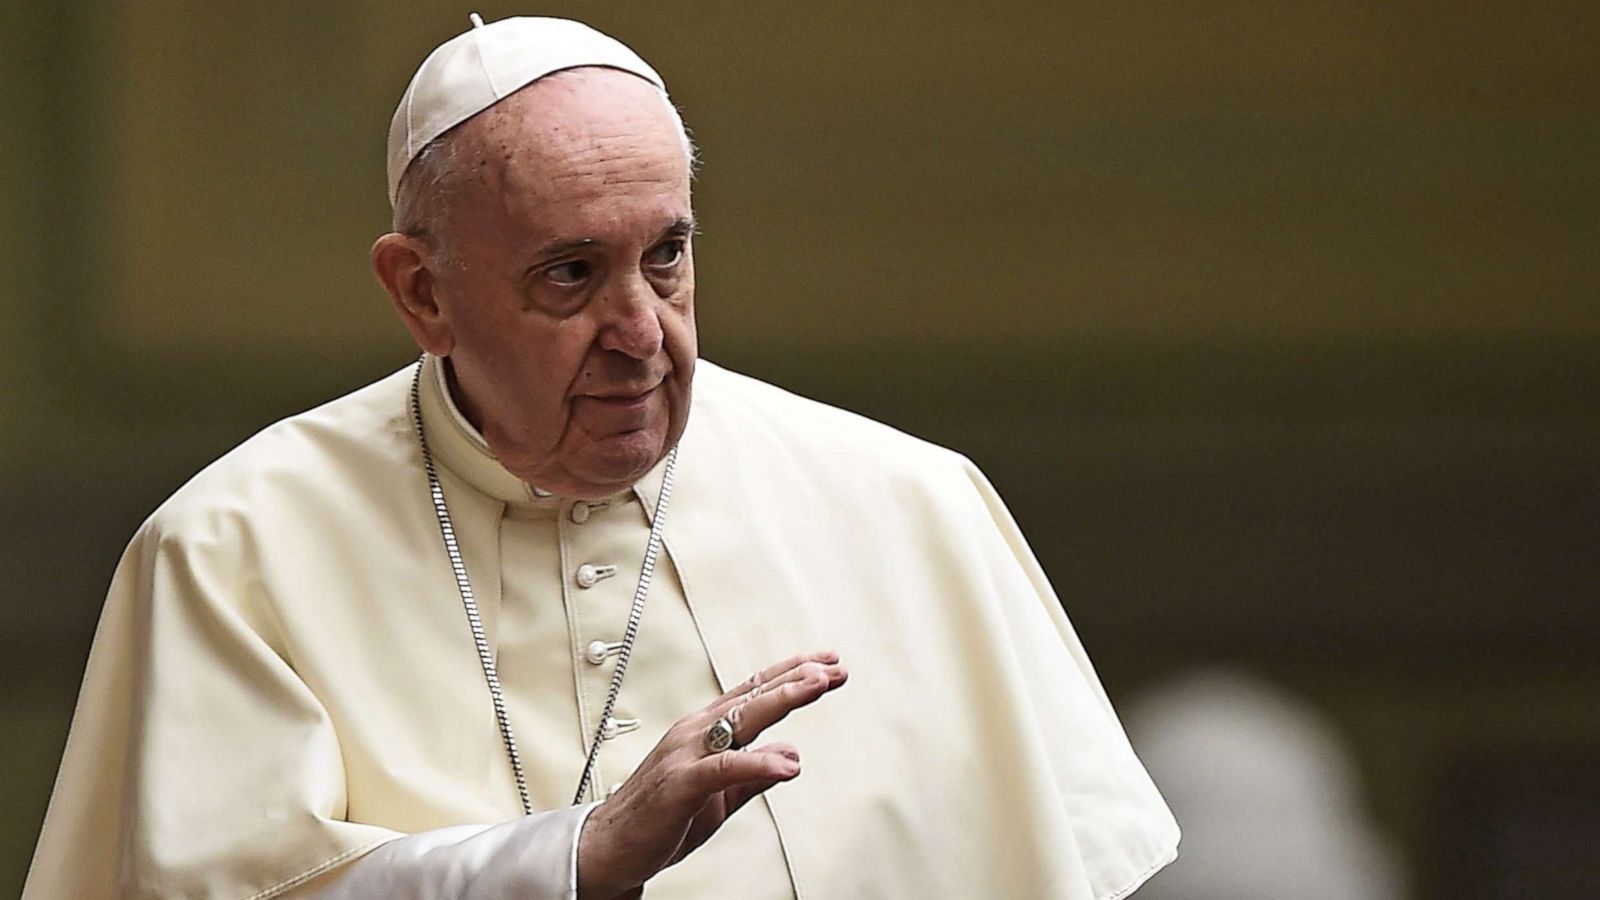 Will the end of Bergoglio’s false church be the end of the New World Order?